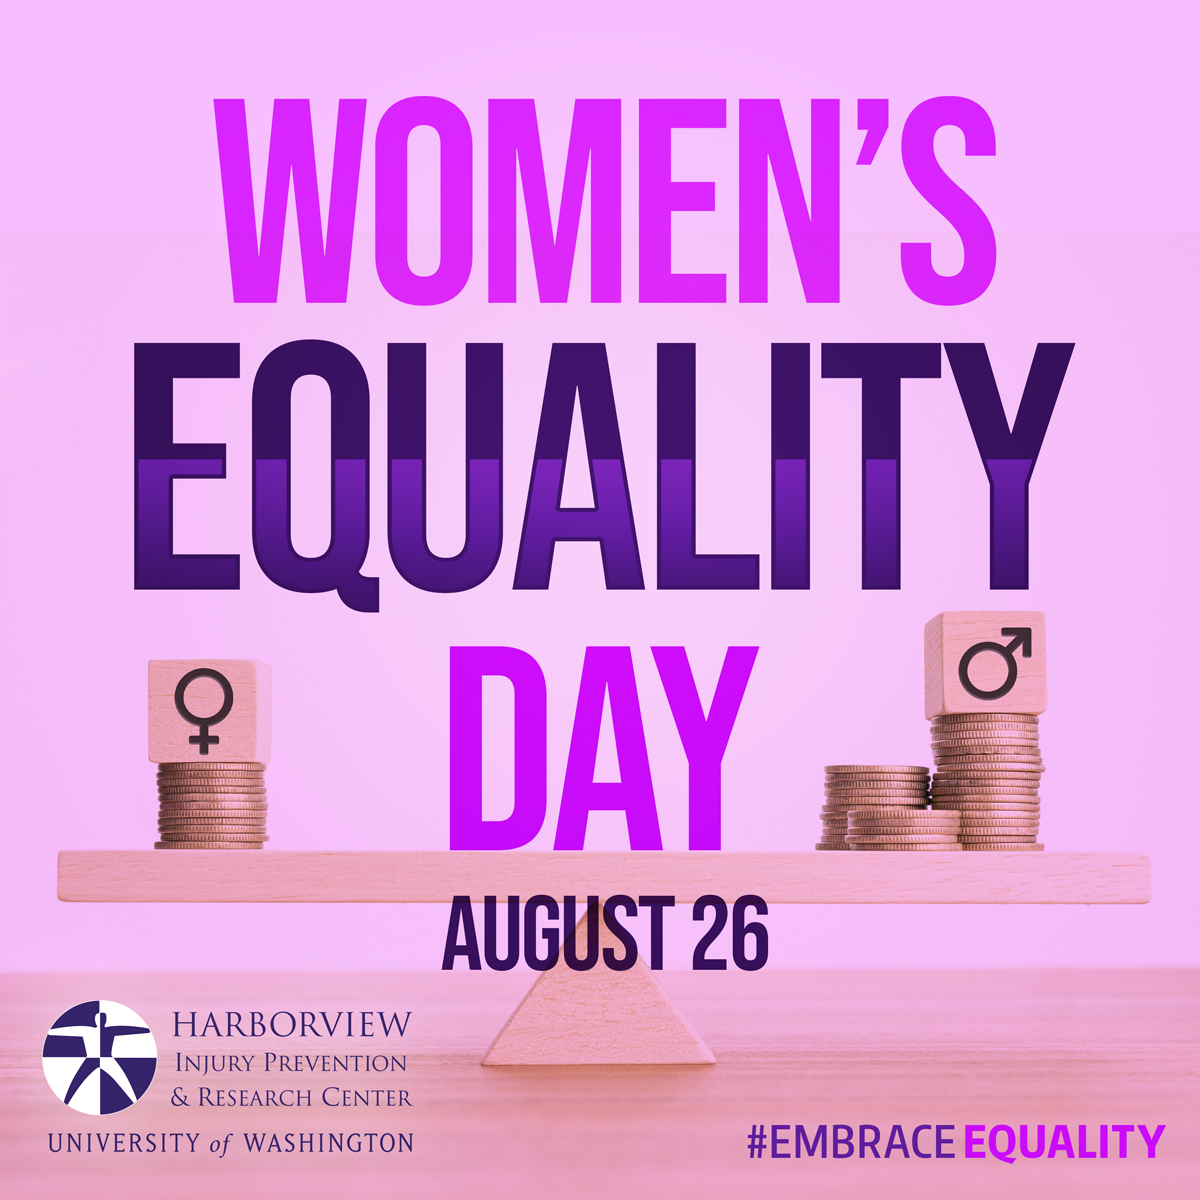 Women's equality day is celebrated around the world on August 26 to empower womens, background. Equality day of womens concept backdrop